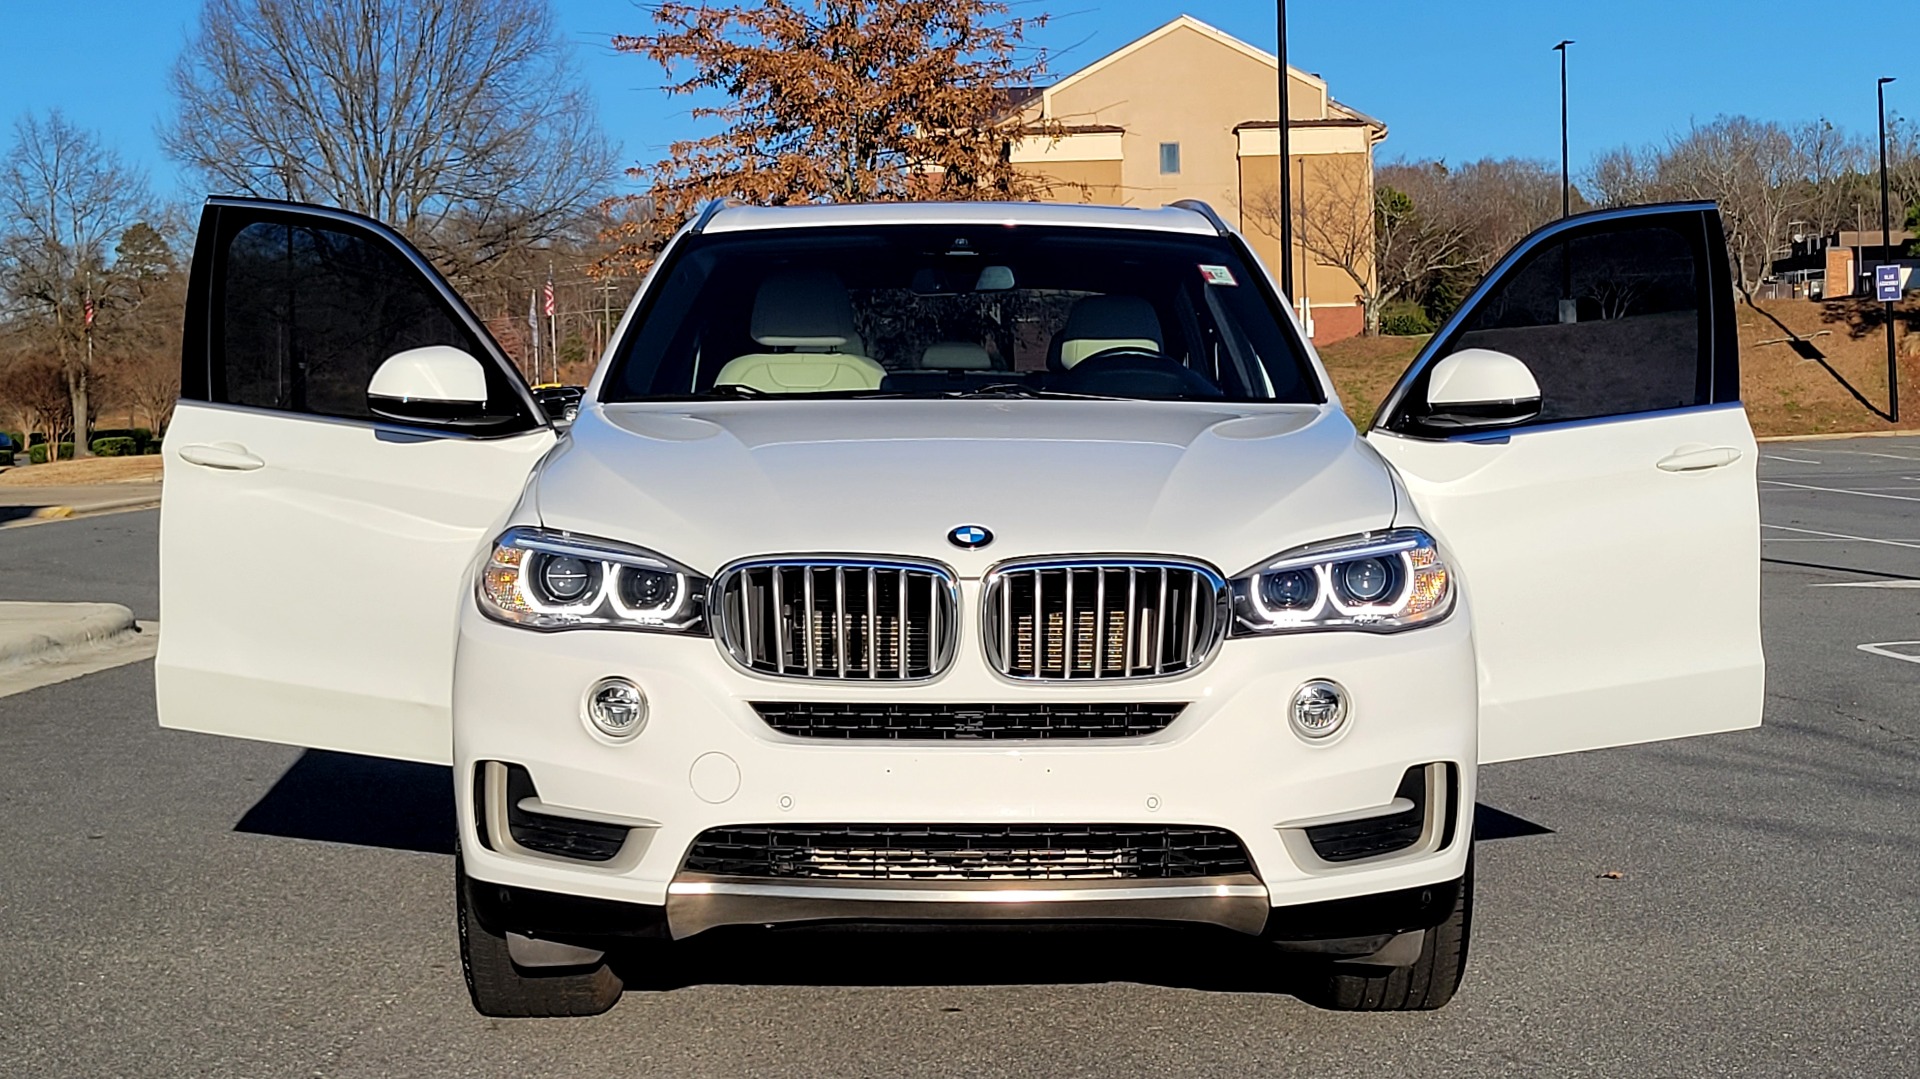 Used 2018 BMW X5 XDRIVE35I PREMIUM / DRVR ASST / HUD / WIRELESS CHARGING / HTD ST for sale $46,795 at Formula Imports in Charlotte NC 28227 22